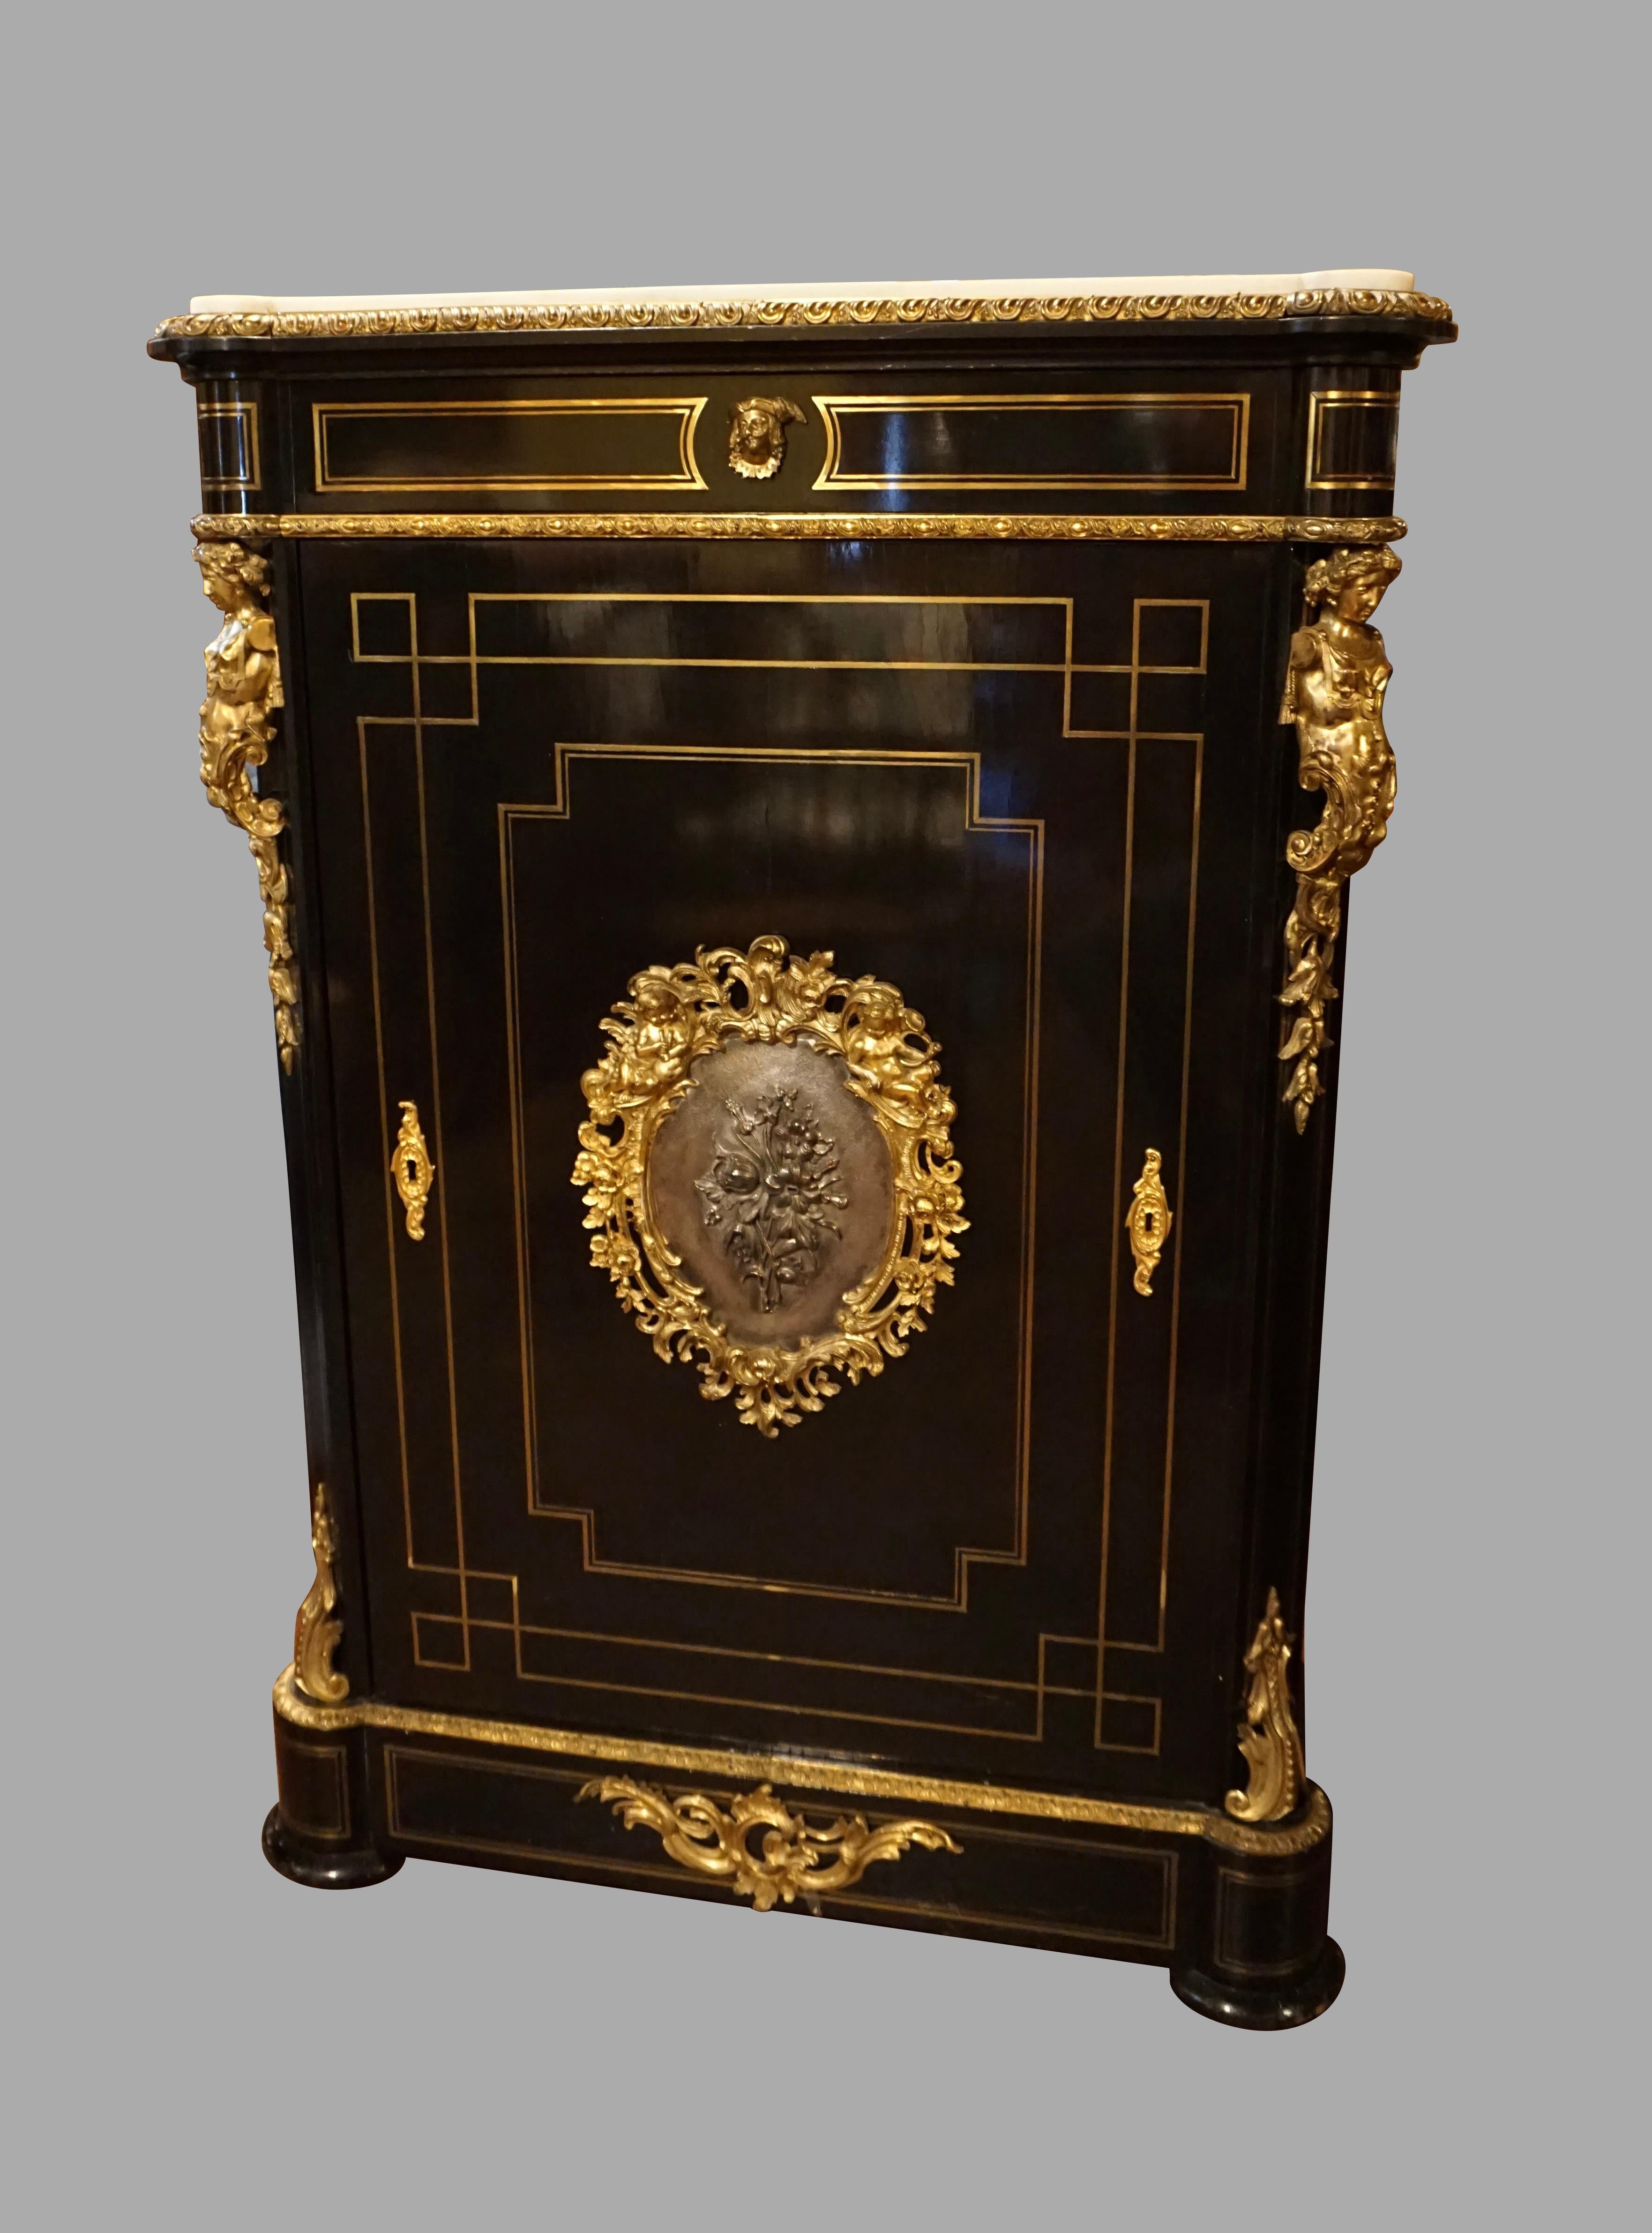 A very good quality French Napoleon III period ebonized beech side cabinet with an inset white carrara marble top, the marble surrounded by an ormolu gadrooned edge above a single cabinet door with a central bronze mounted plaque. The piece is